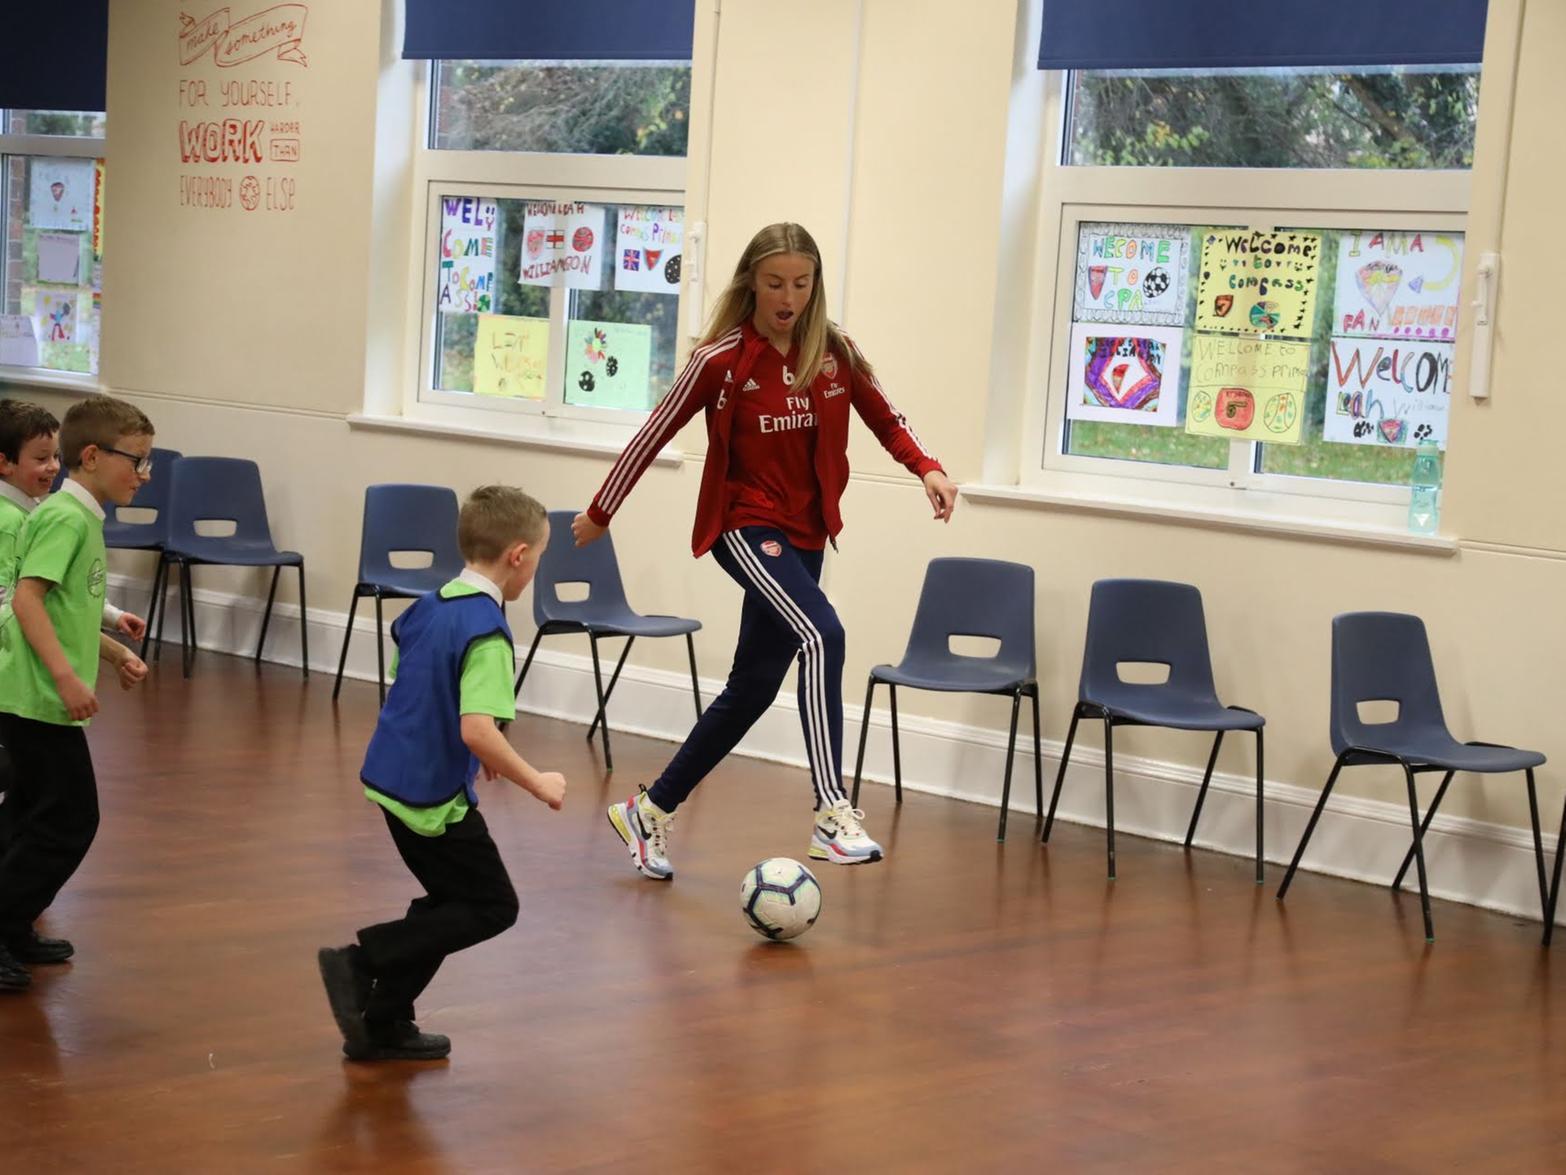 Leah really encouraged the children and joined in the kickabout in the hall while it rained